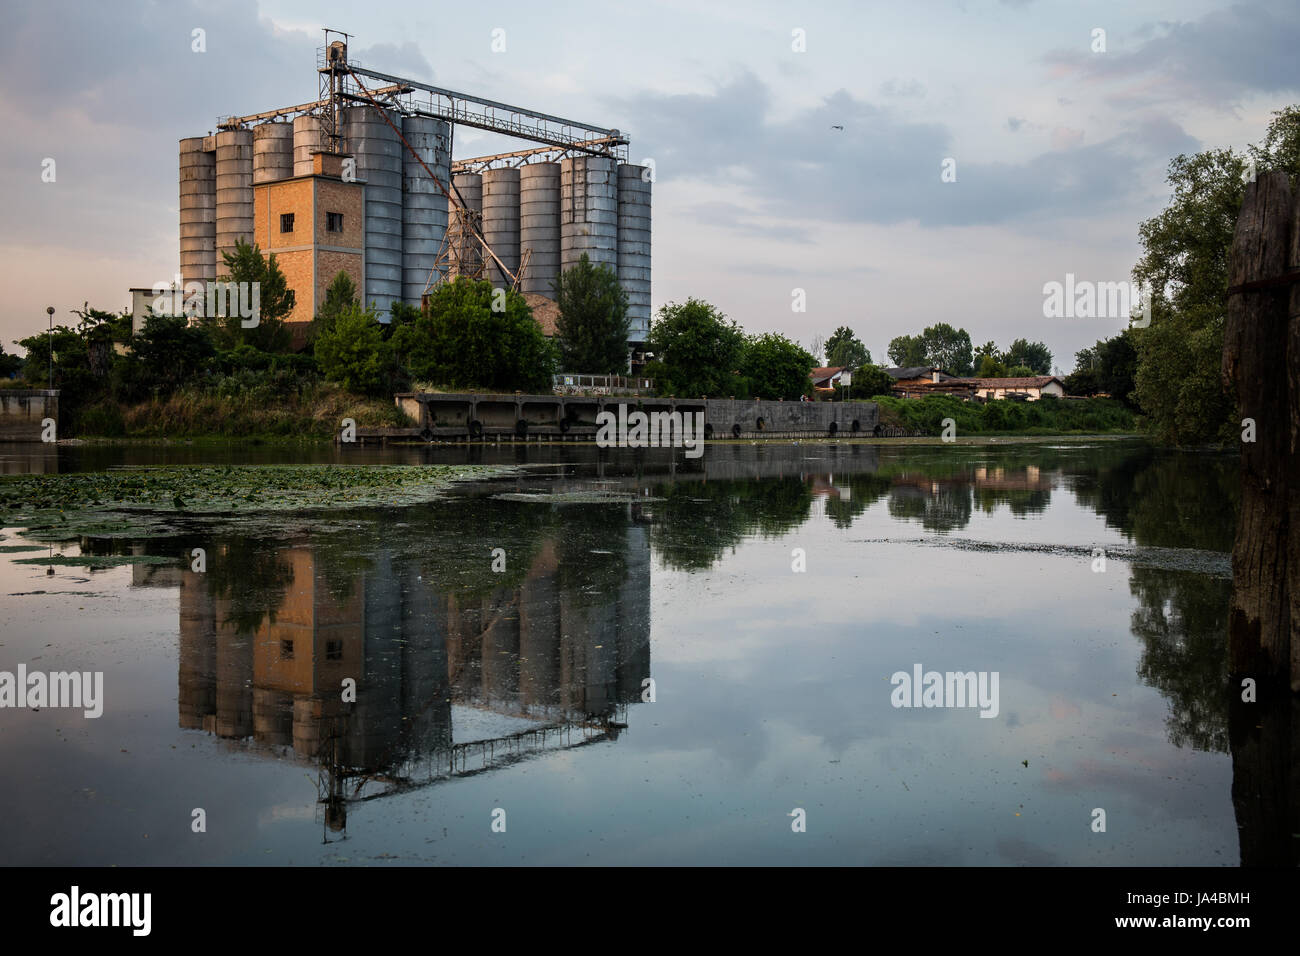 Old factory with silos and reflection on the water - landscape Stock Photo